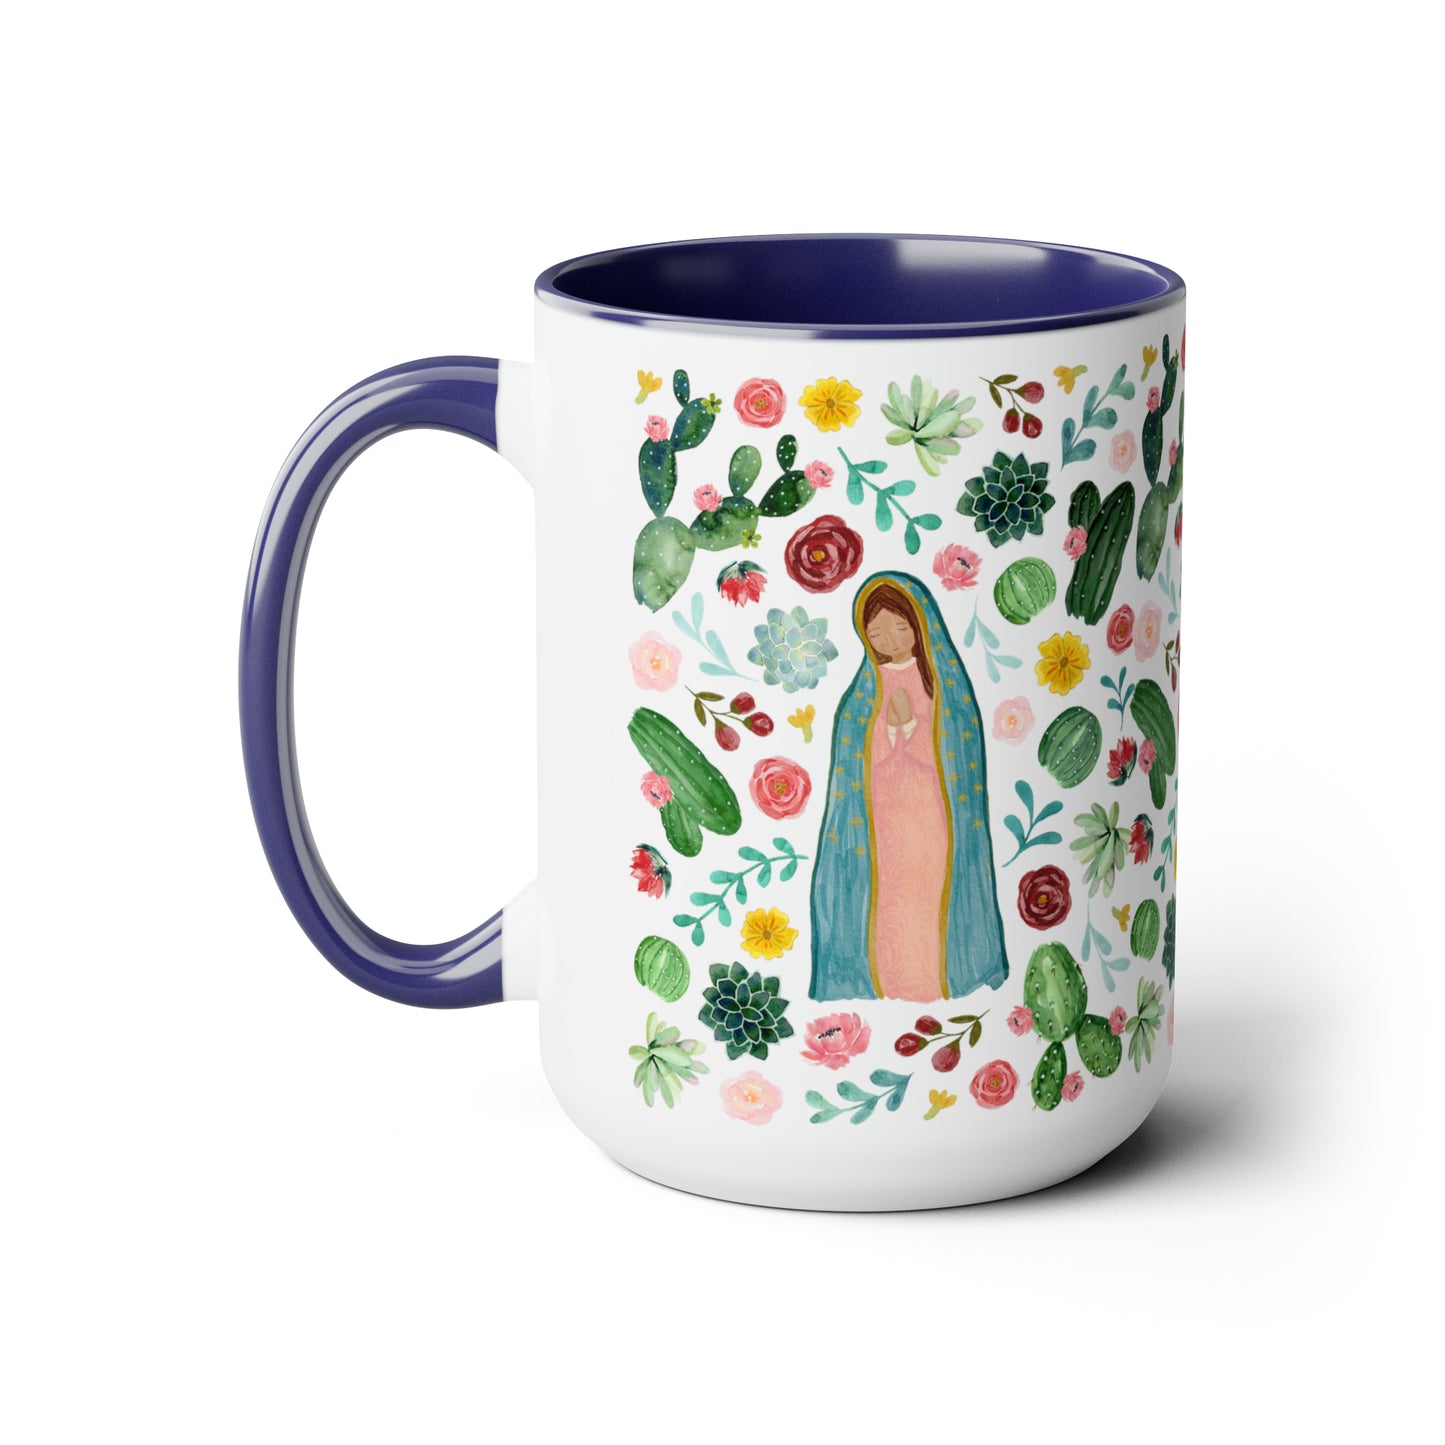 Virgen de Guadalupe Coffee Mugs, 15oz for mother, friends. Catholic gift for her. Virgencita cup.